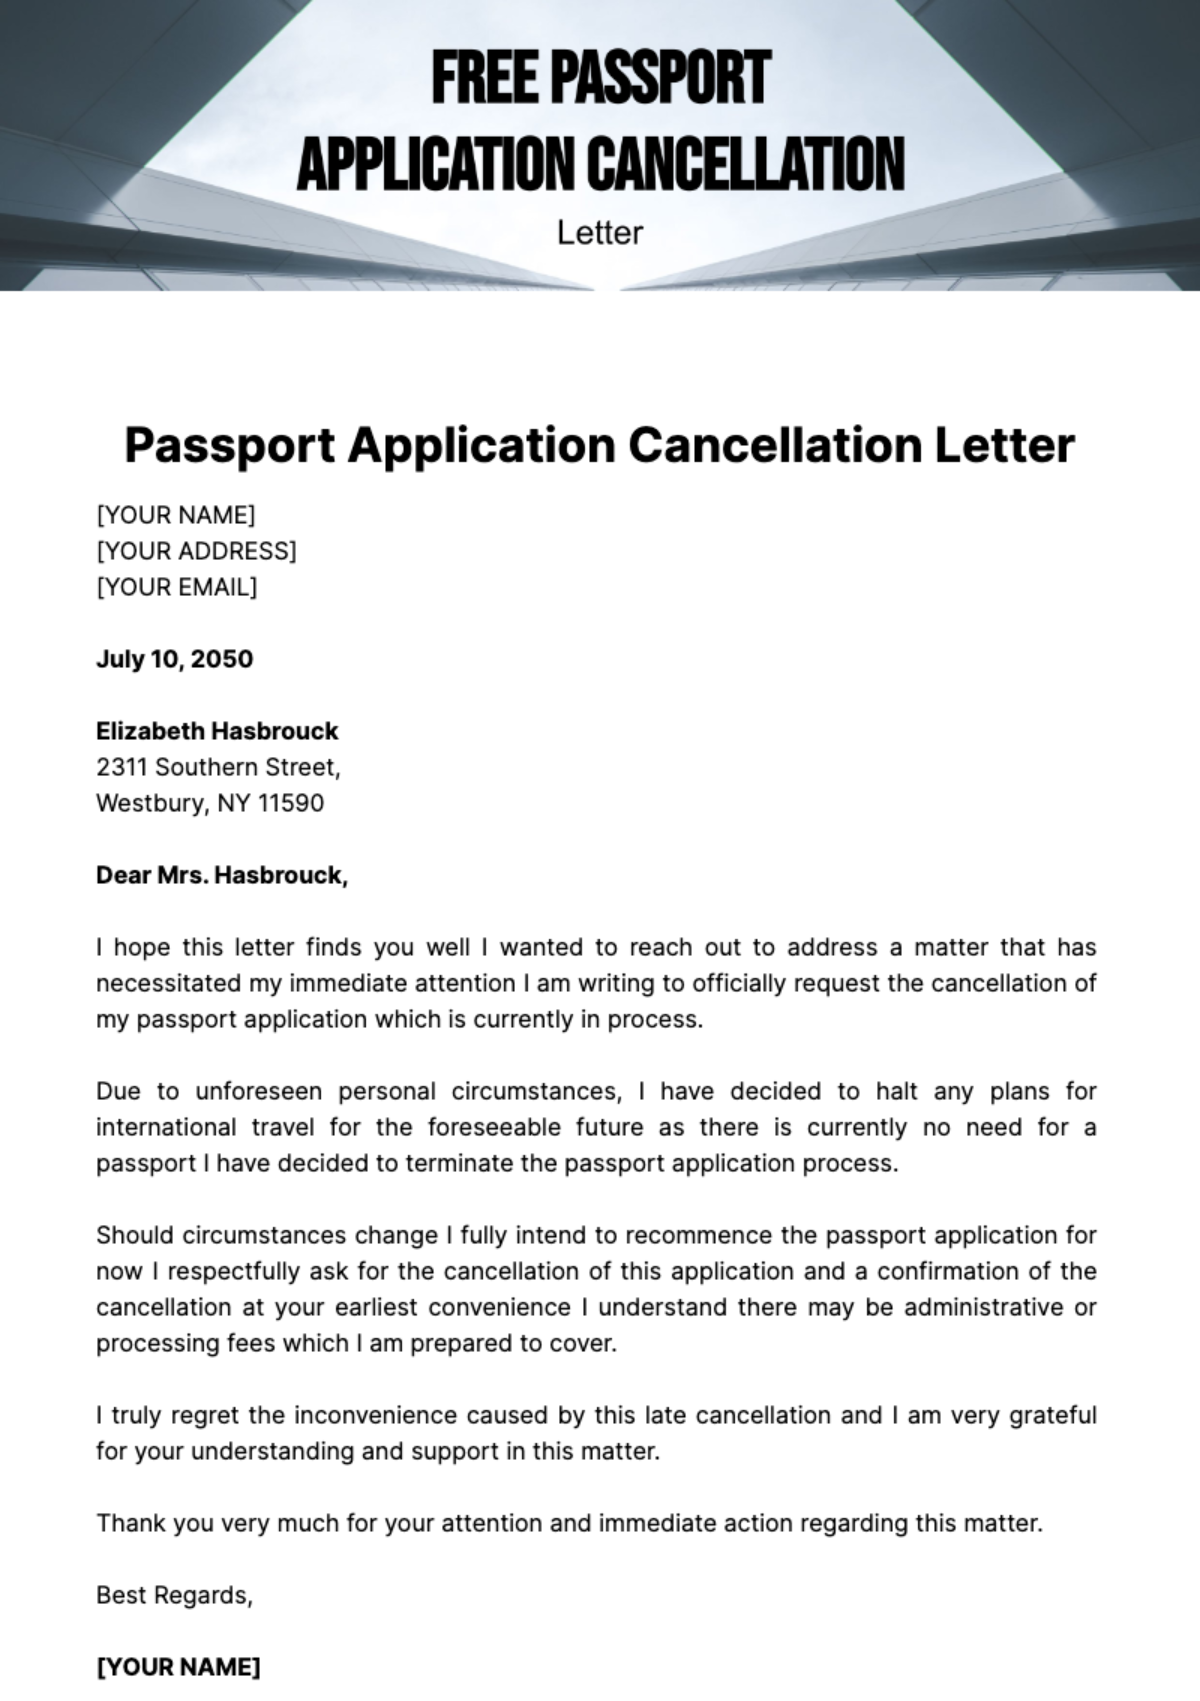 Free Passport Application Cancellation Letter Template